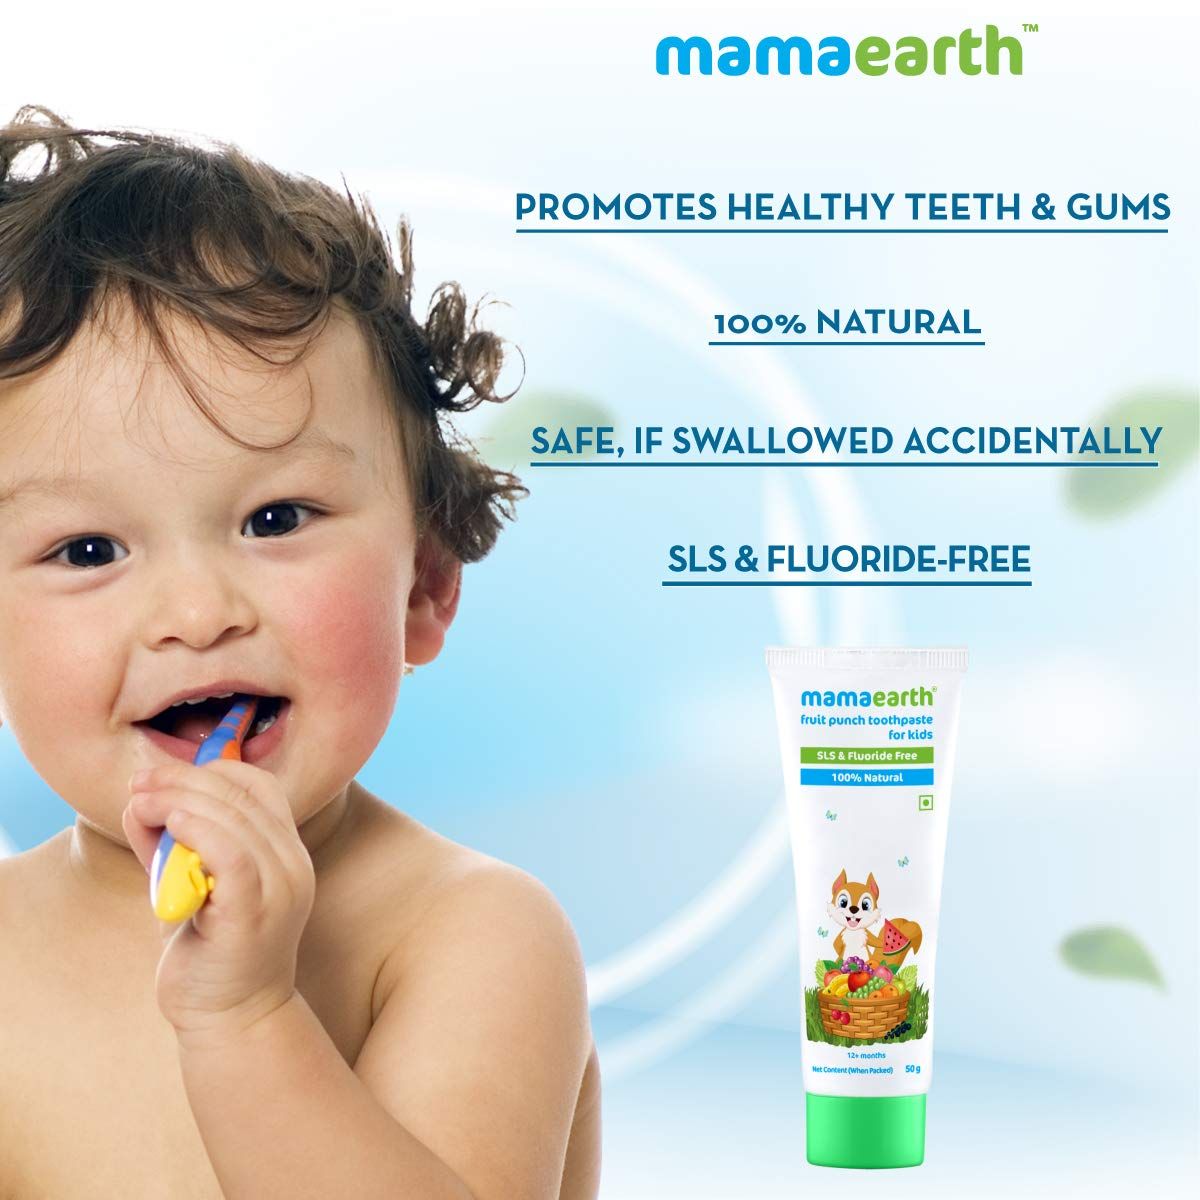 Mamaearth BB Fruit Punch Toothpaste 50g